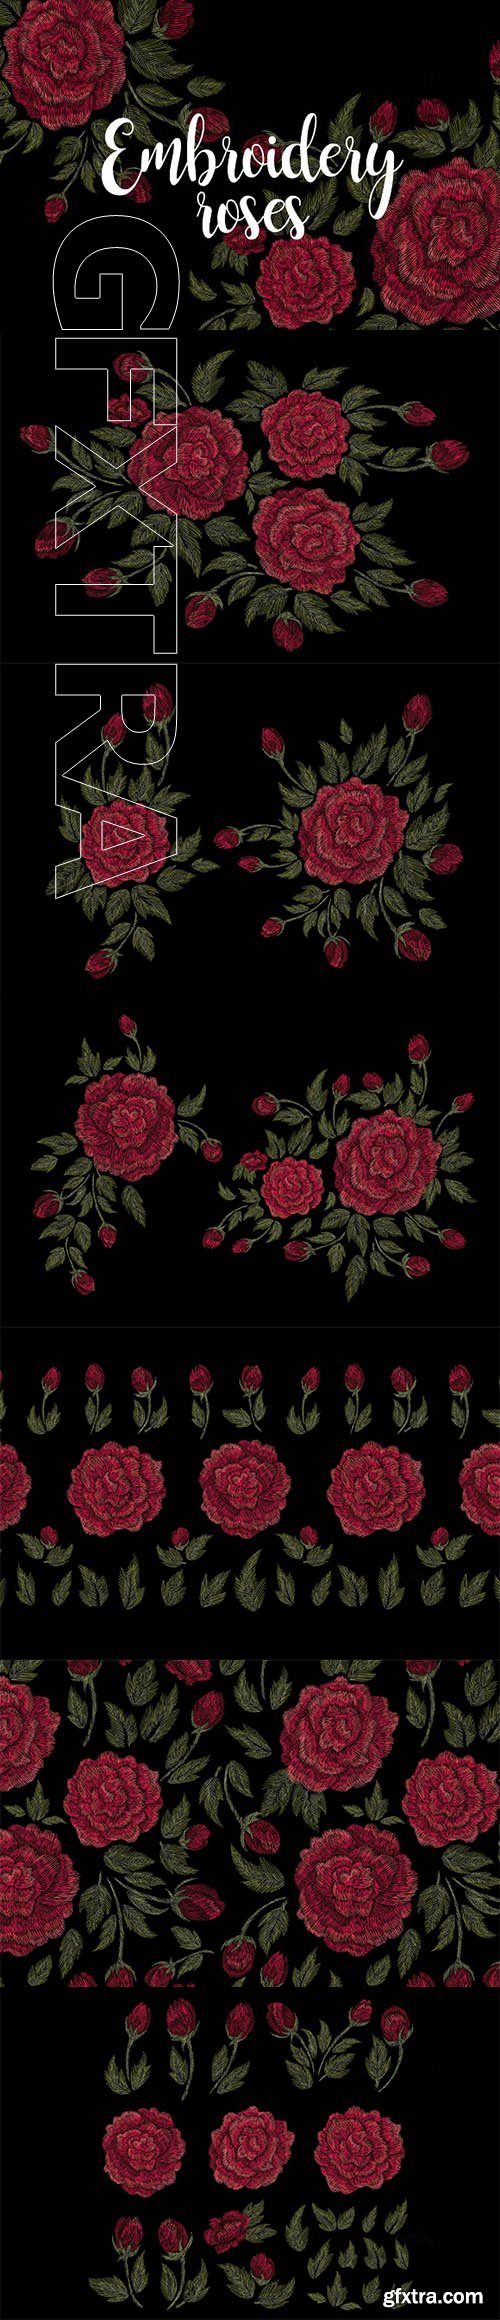 CreativeMarket - Embroidery roses 2245964